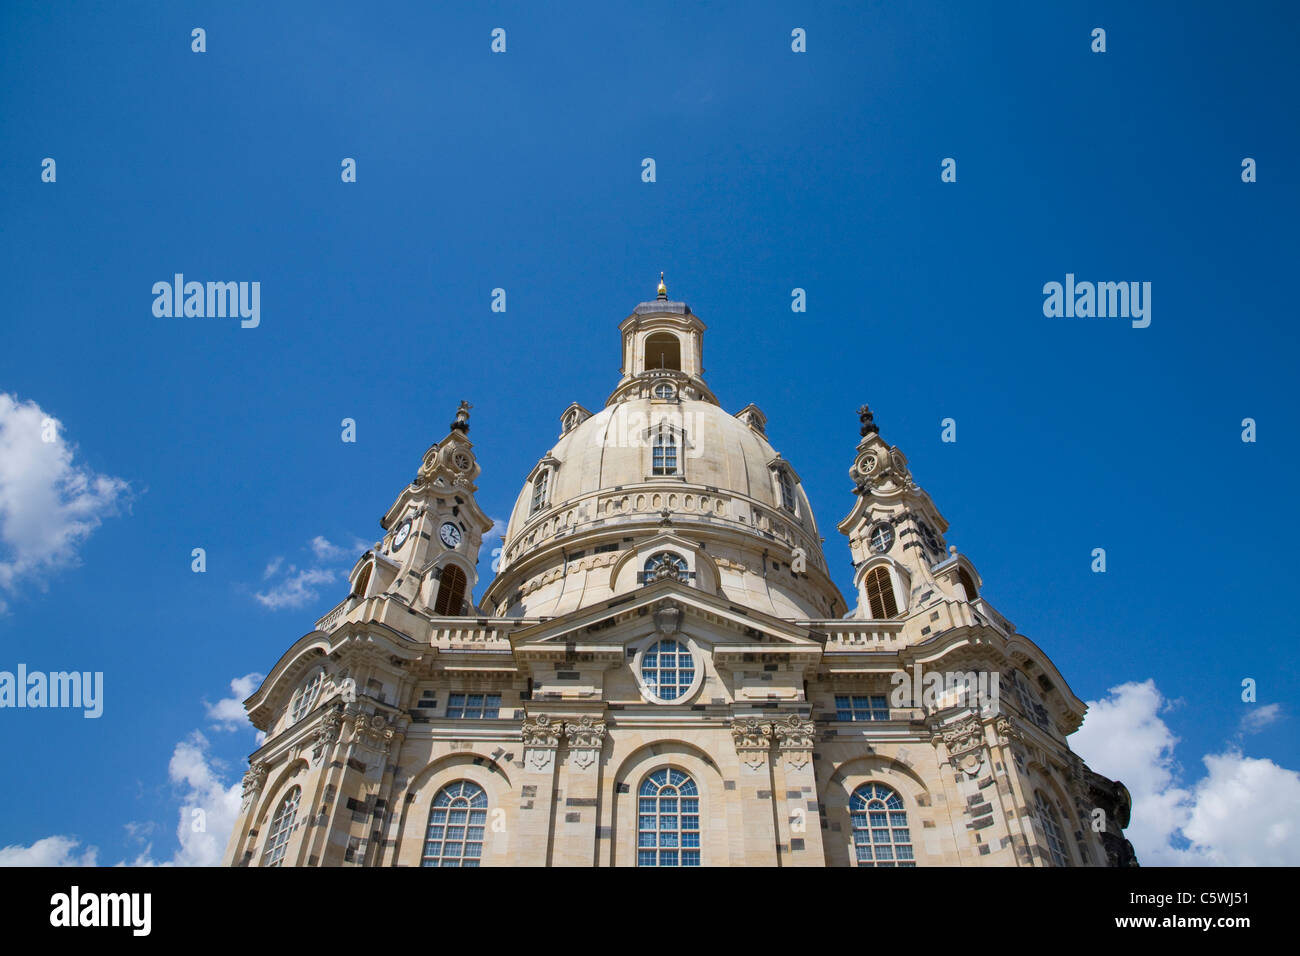 Allemagne, Dresde, la Frauenkirche, low angle view Banque D'Images